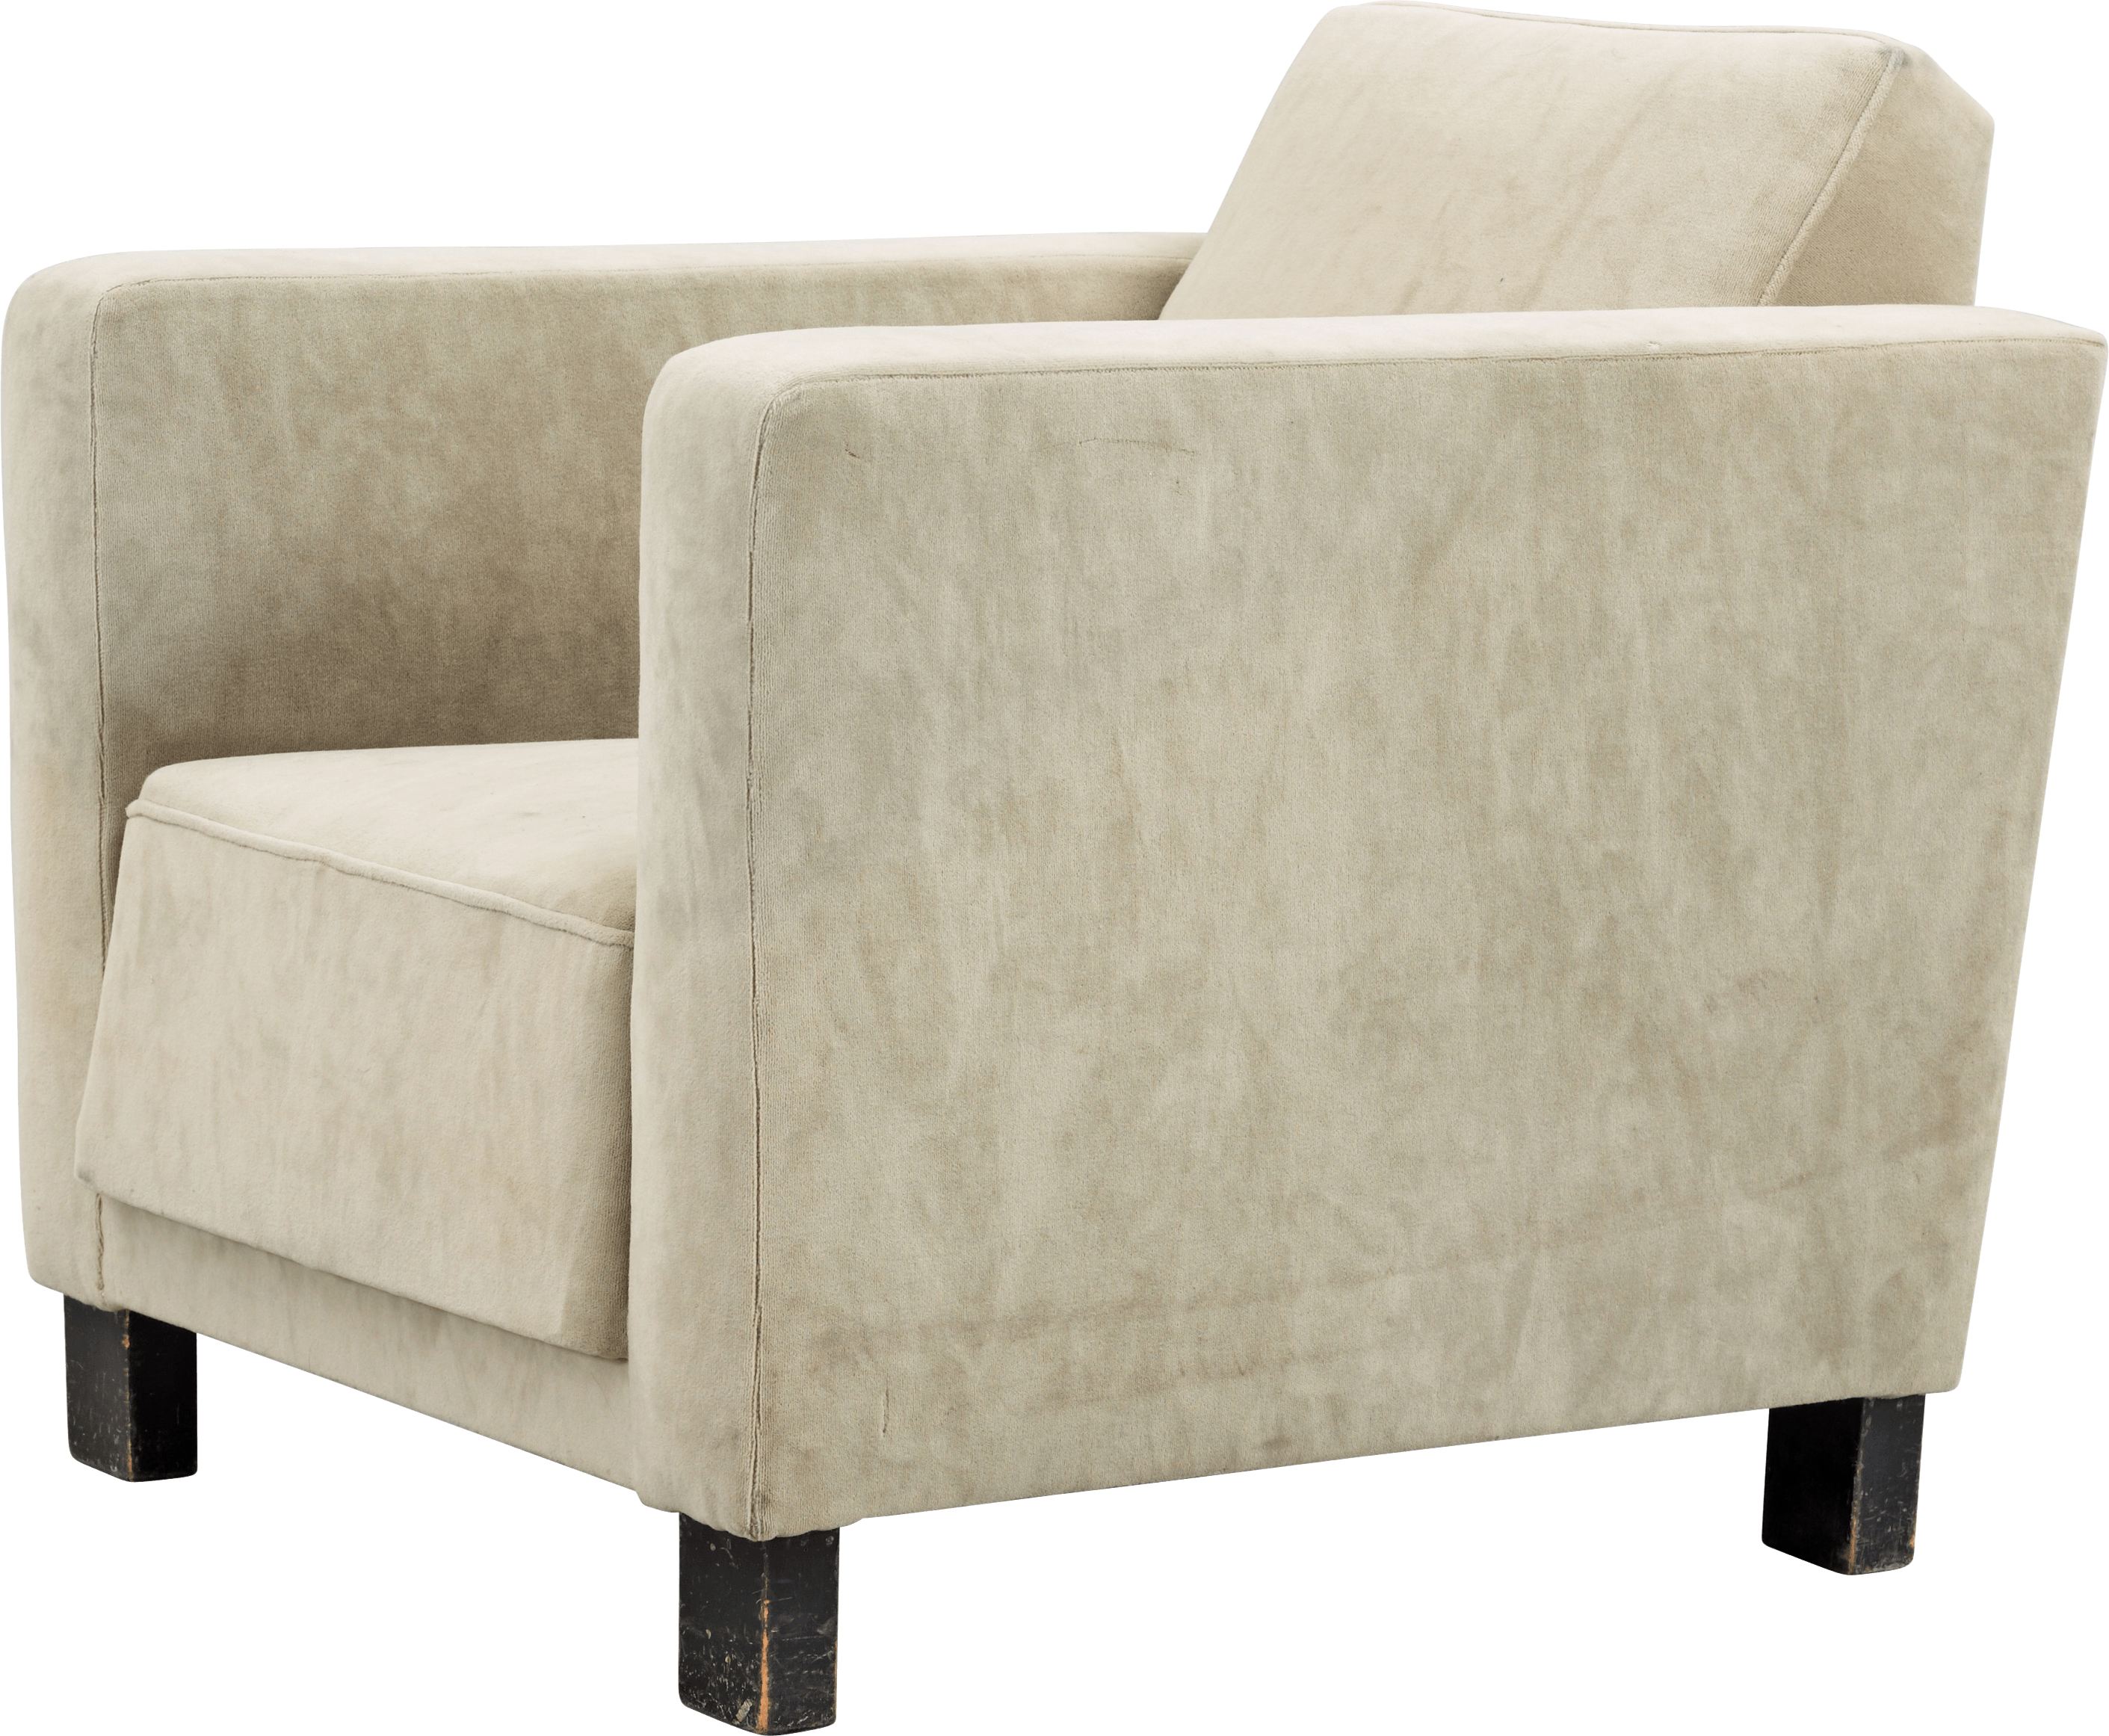 Armchair Png Image PNG Image